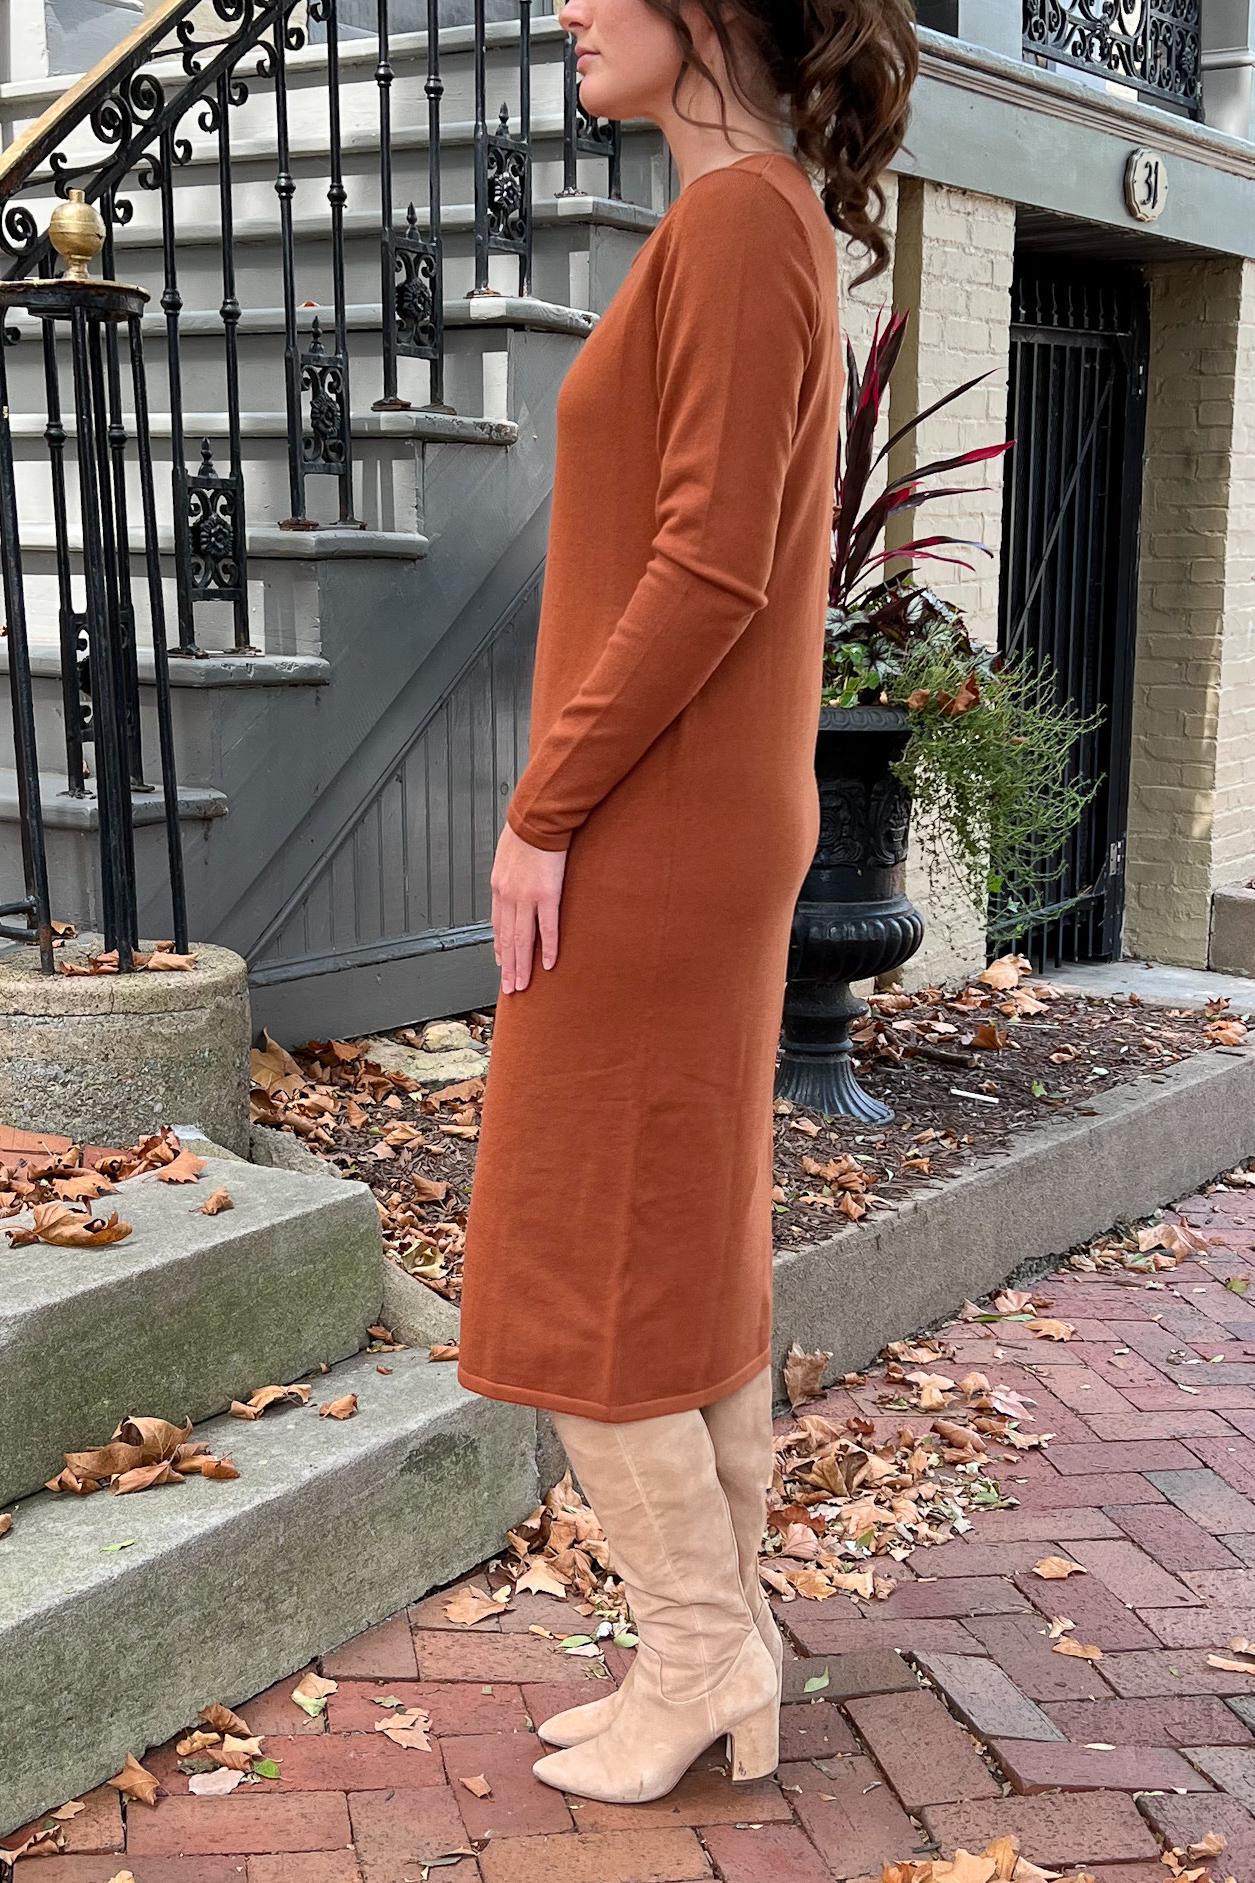 THE QUINN EVERYDAY SCOOP NECK SWEATER DRESS IN TERRACOTTA